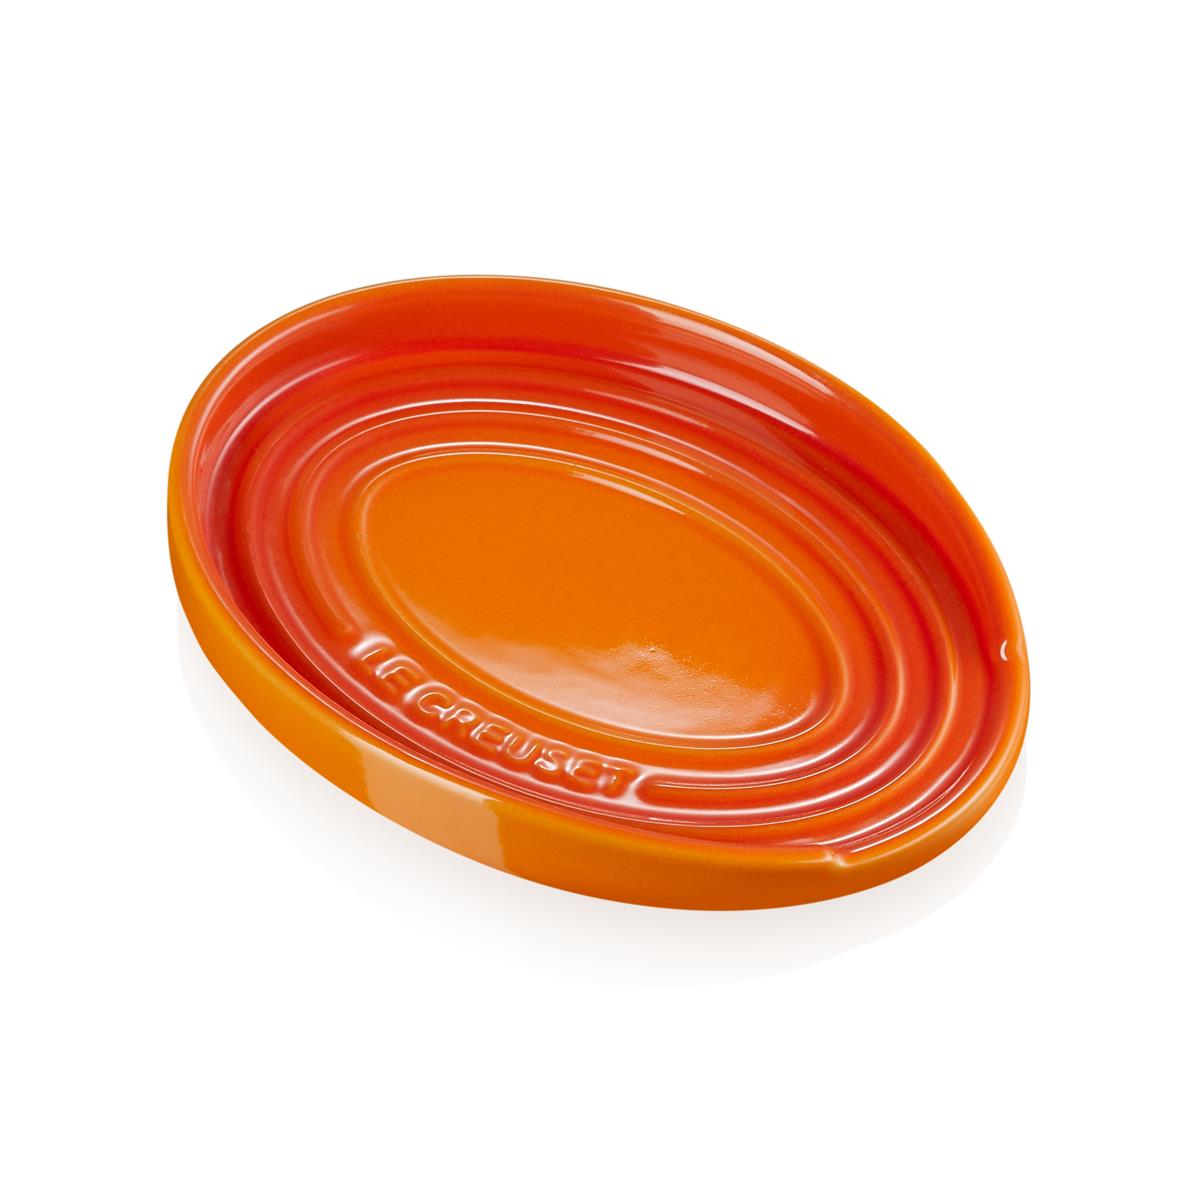 Where should the le creuset spoon rest be positioned?